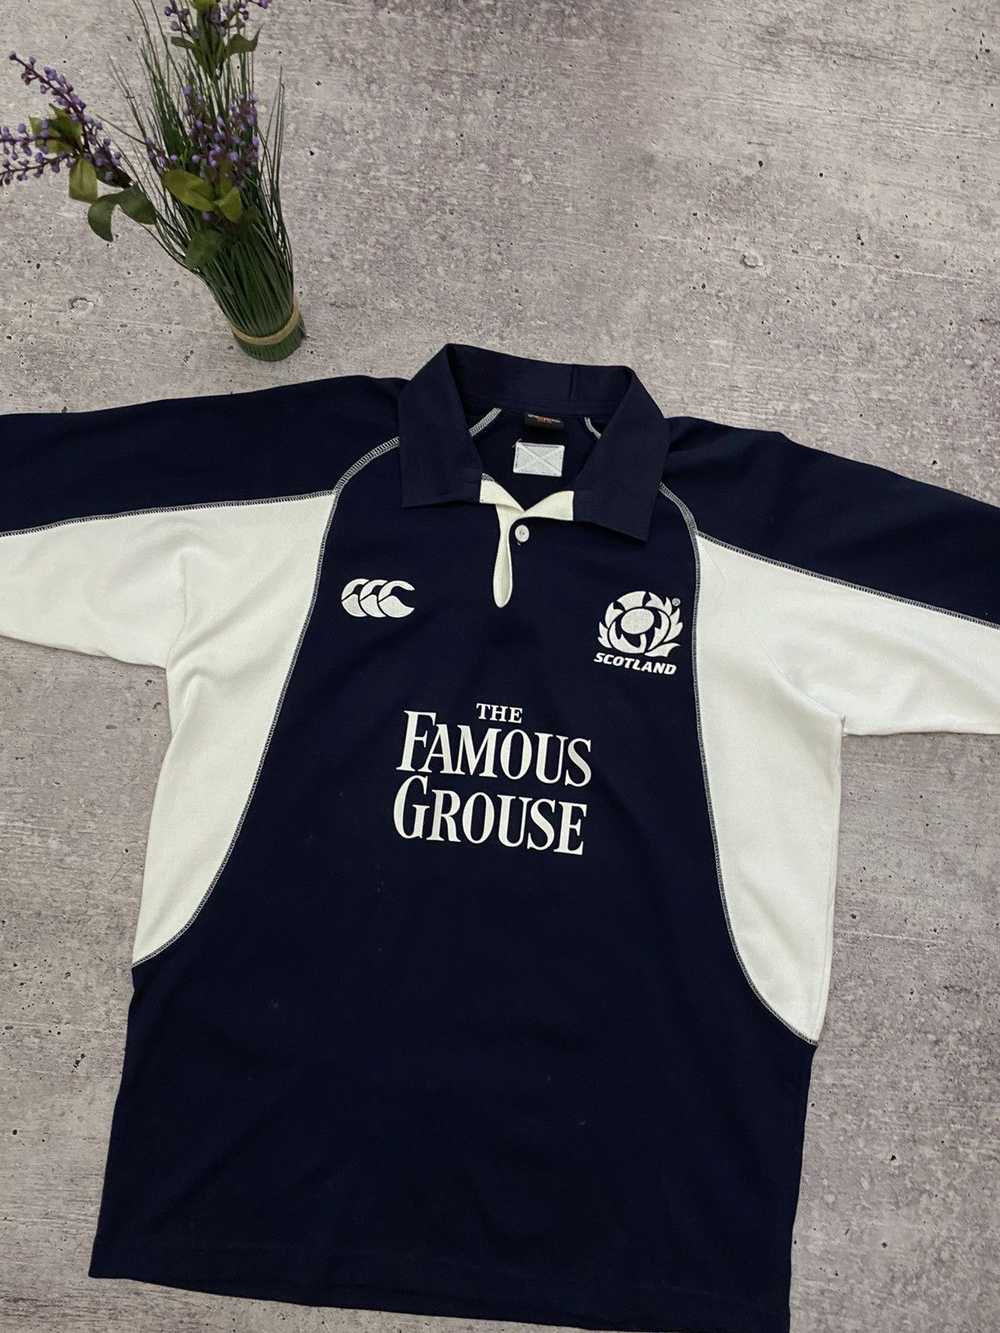 Vintage Scotland Rugby Union 2006 HOME Shirt Jers… - image 3